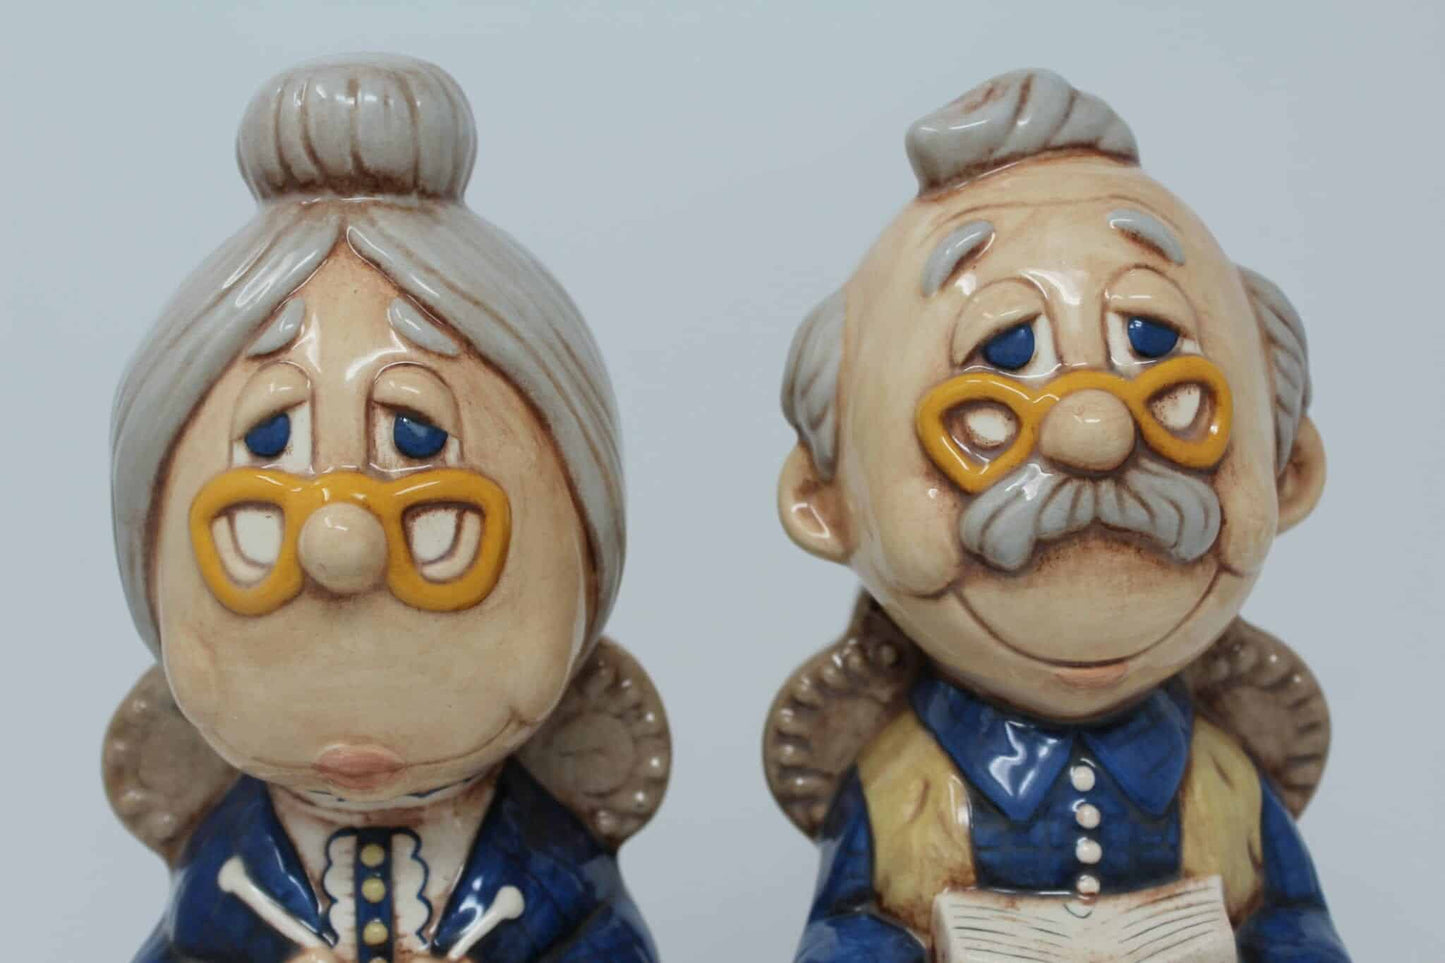 Bookends, Grandma and Grandpa (Old Man / Old Woman), Vintage Ceramic